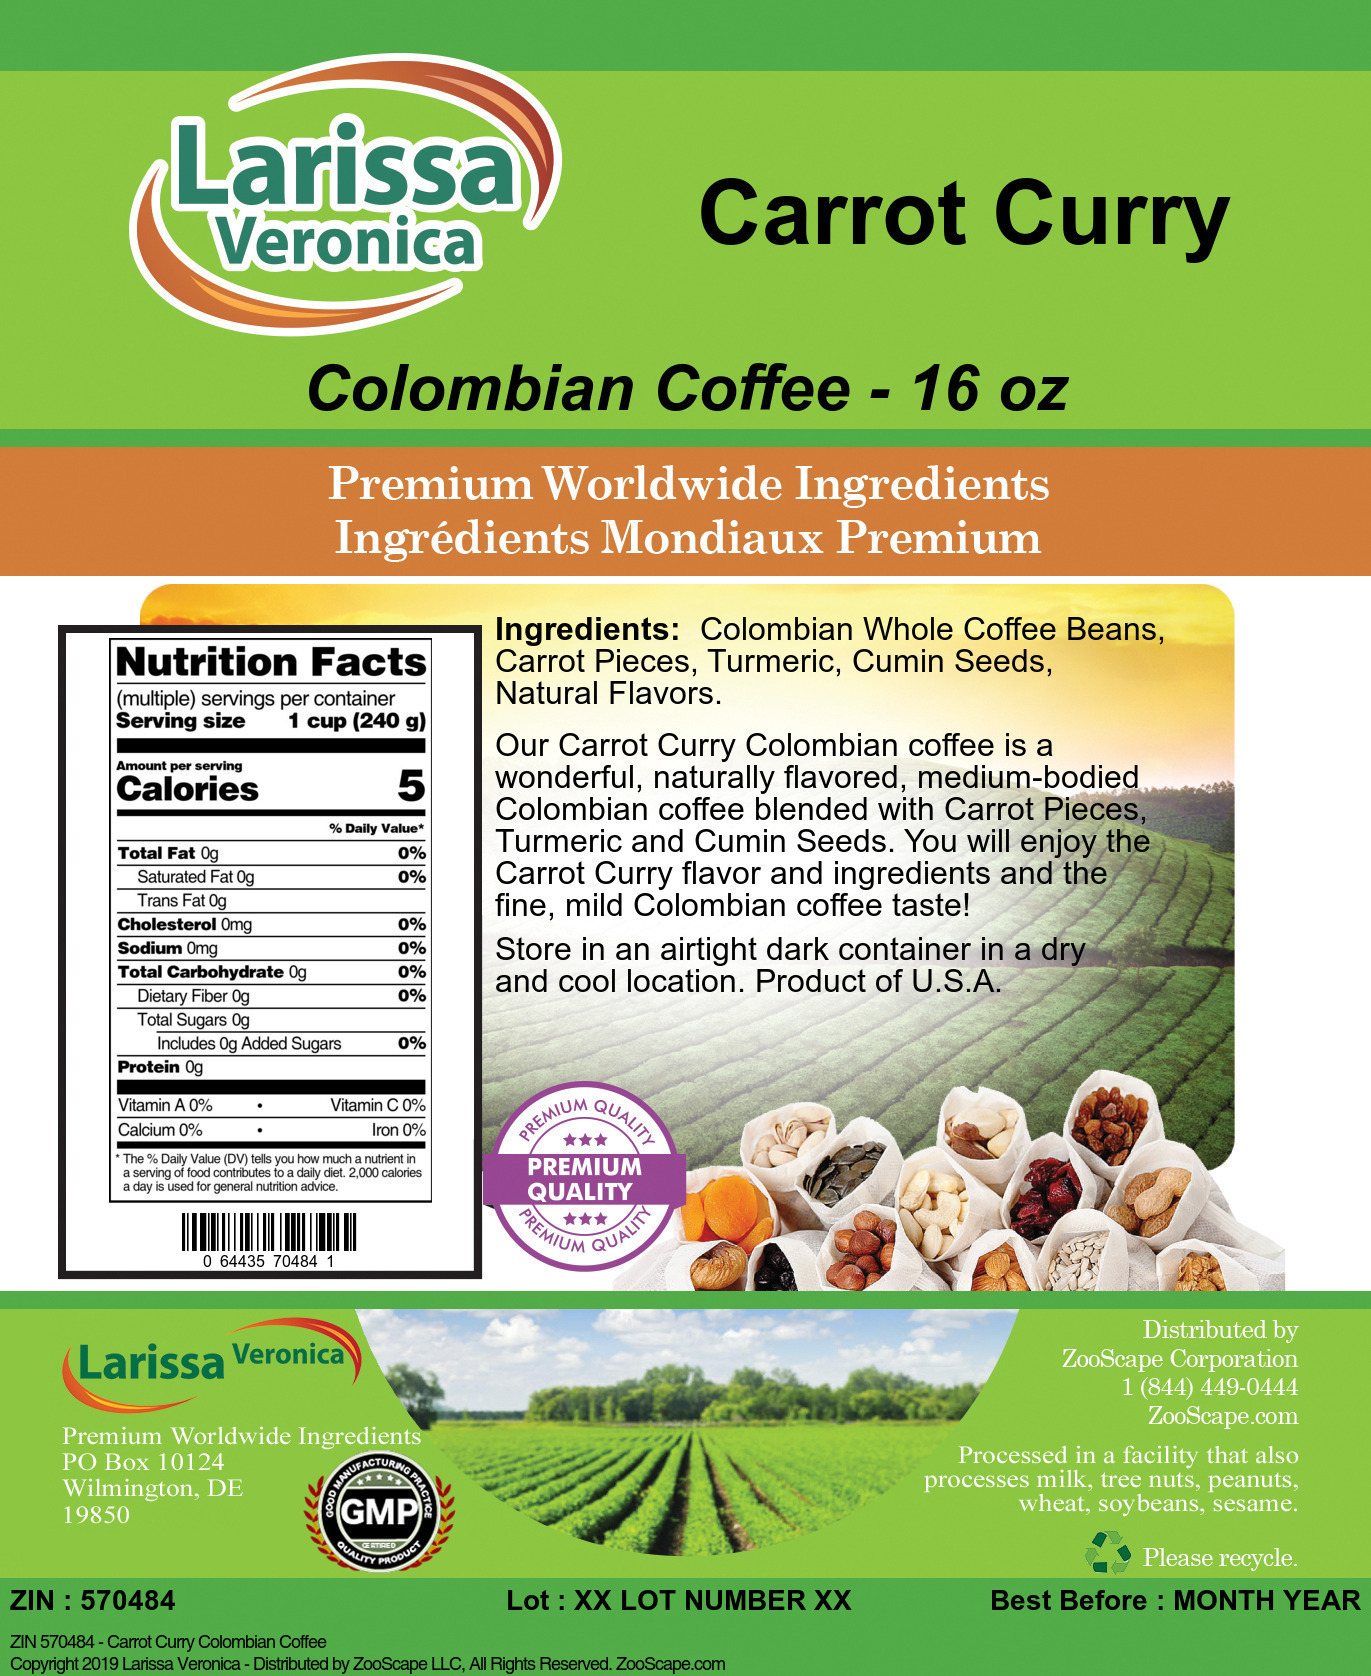 Carrot Curry Colombian Coffee - Label